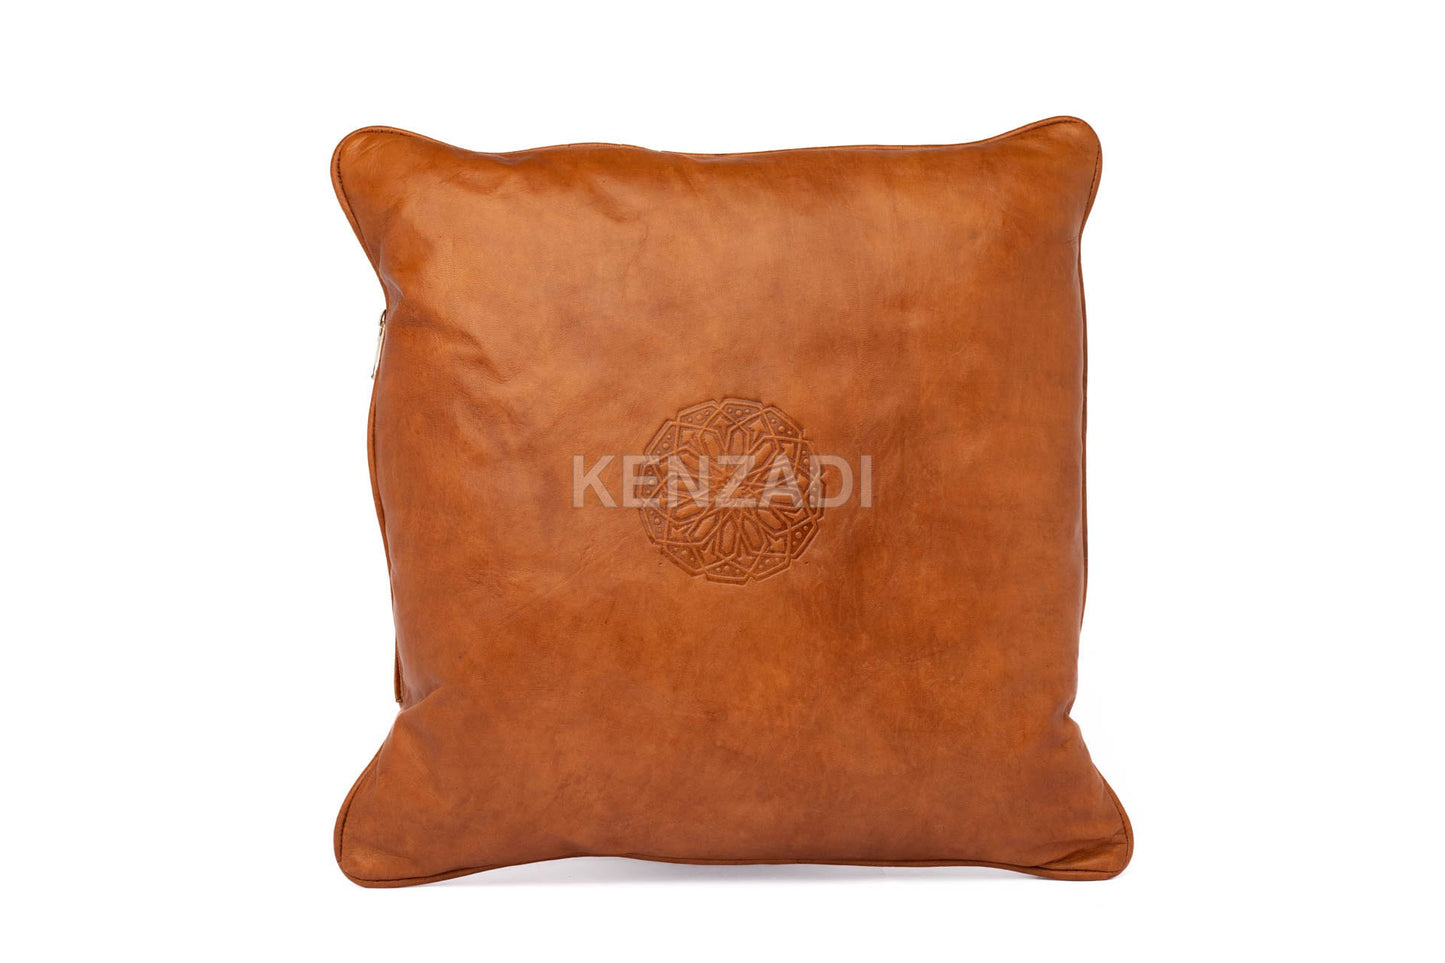 Light Brown Moroccan Leather Pillowcase - Handmade, Durable, and Versatile